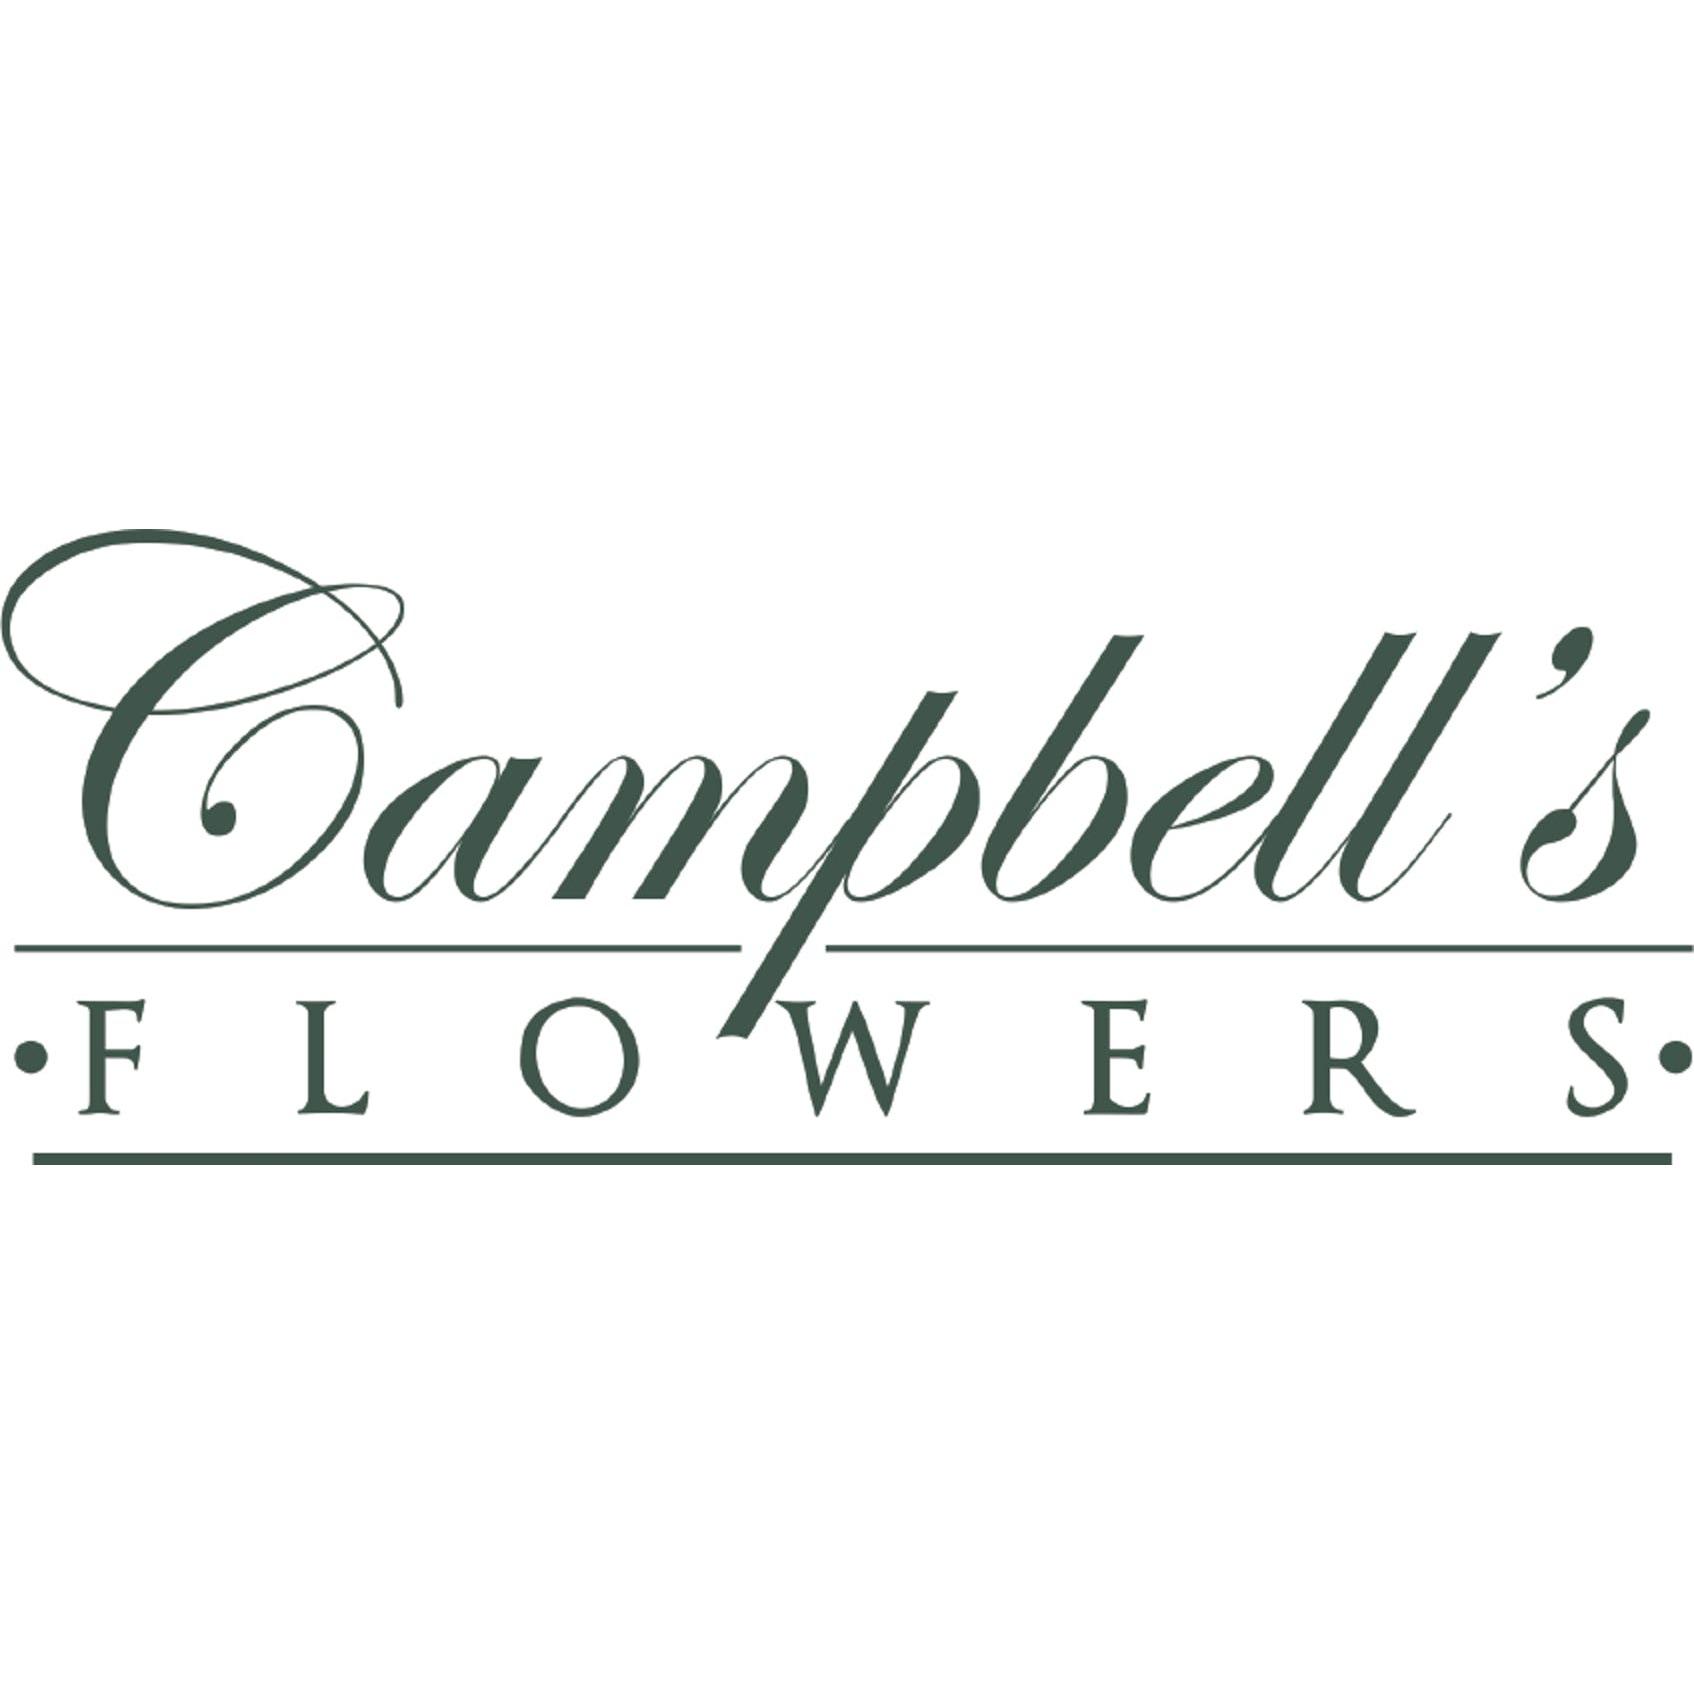 Campbell's Flowers & Greenhouses Photo